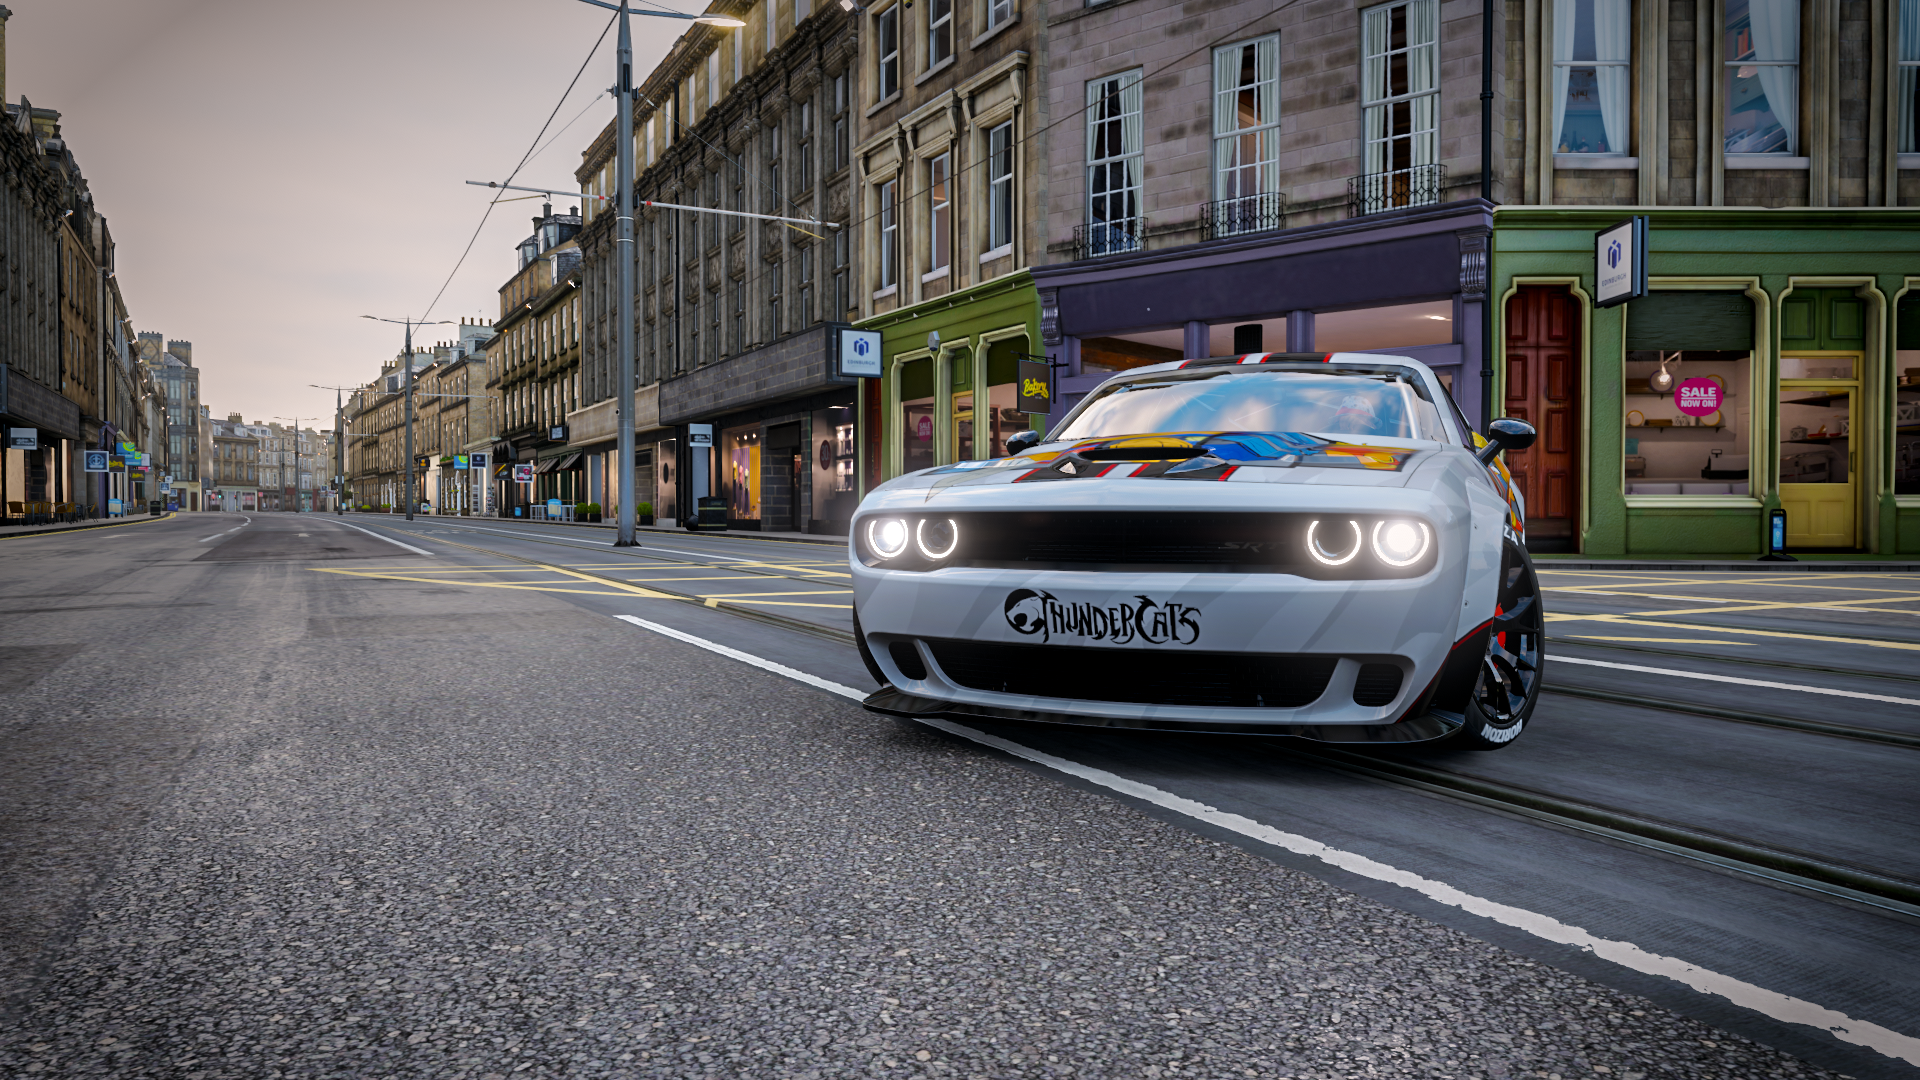 General 1920x1080 Forza Horizon 4 car X box One X screen shot video games American cars muscle cars Dodge Dodge Challenger